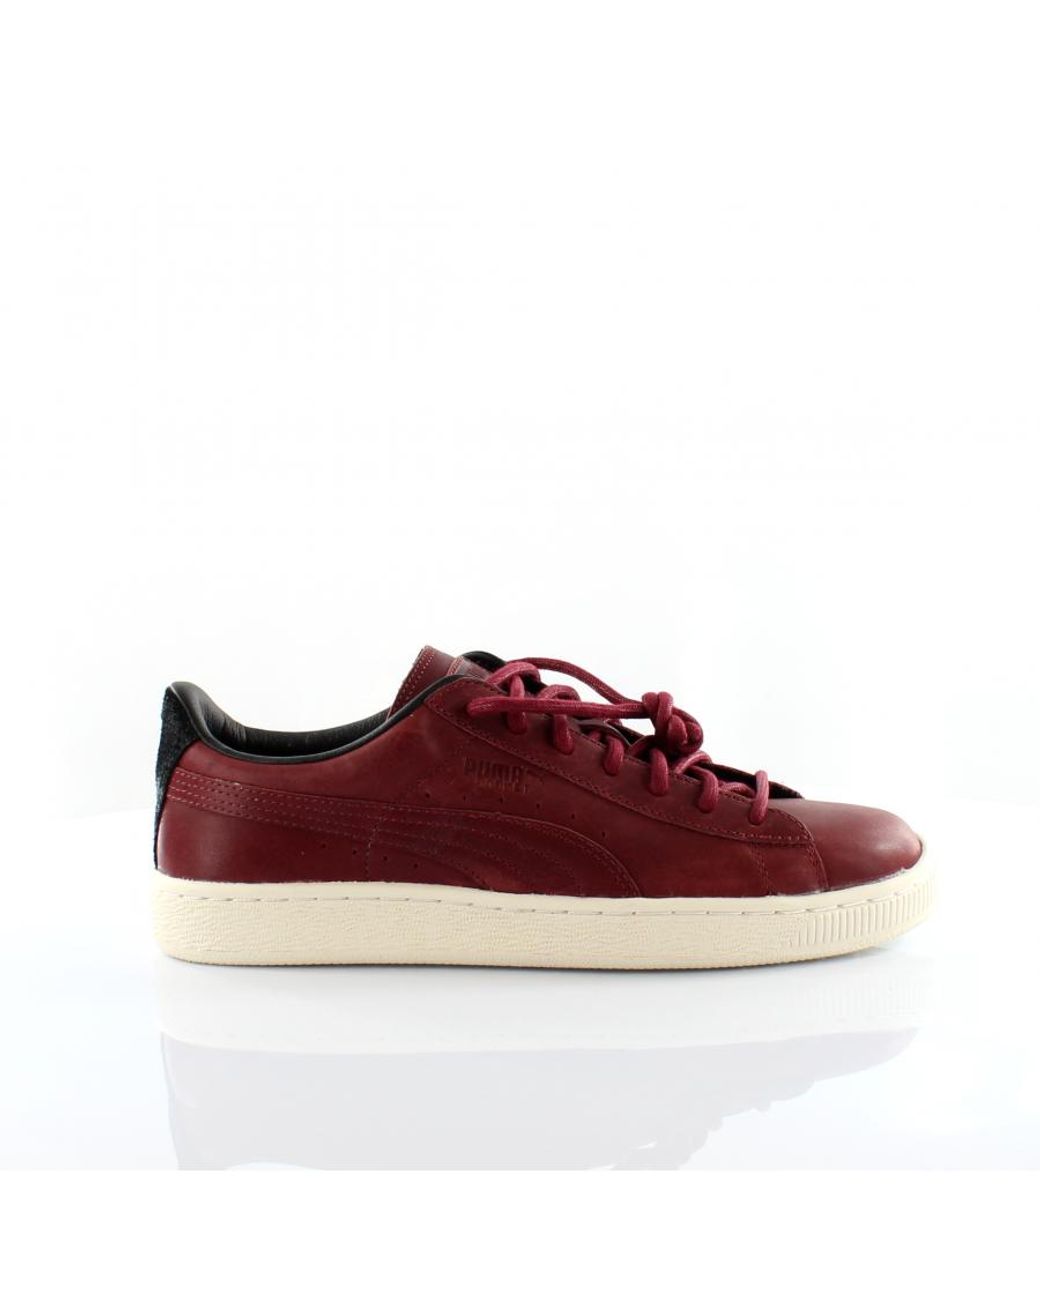 PUMA Basket Citi Series Red Leather Trainers 358891 02 Leather for Men |  Lyst UK